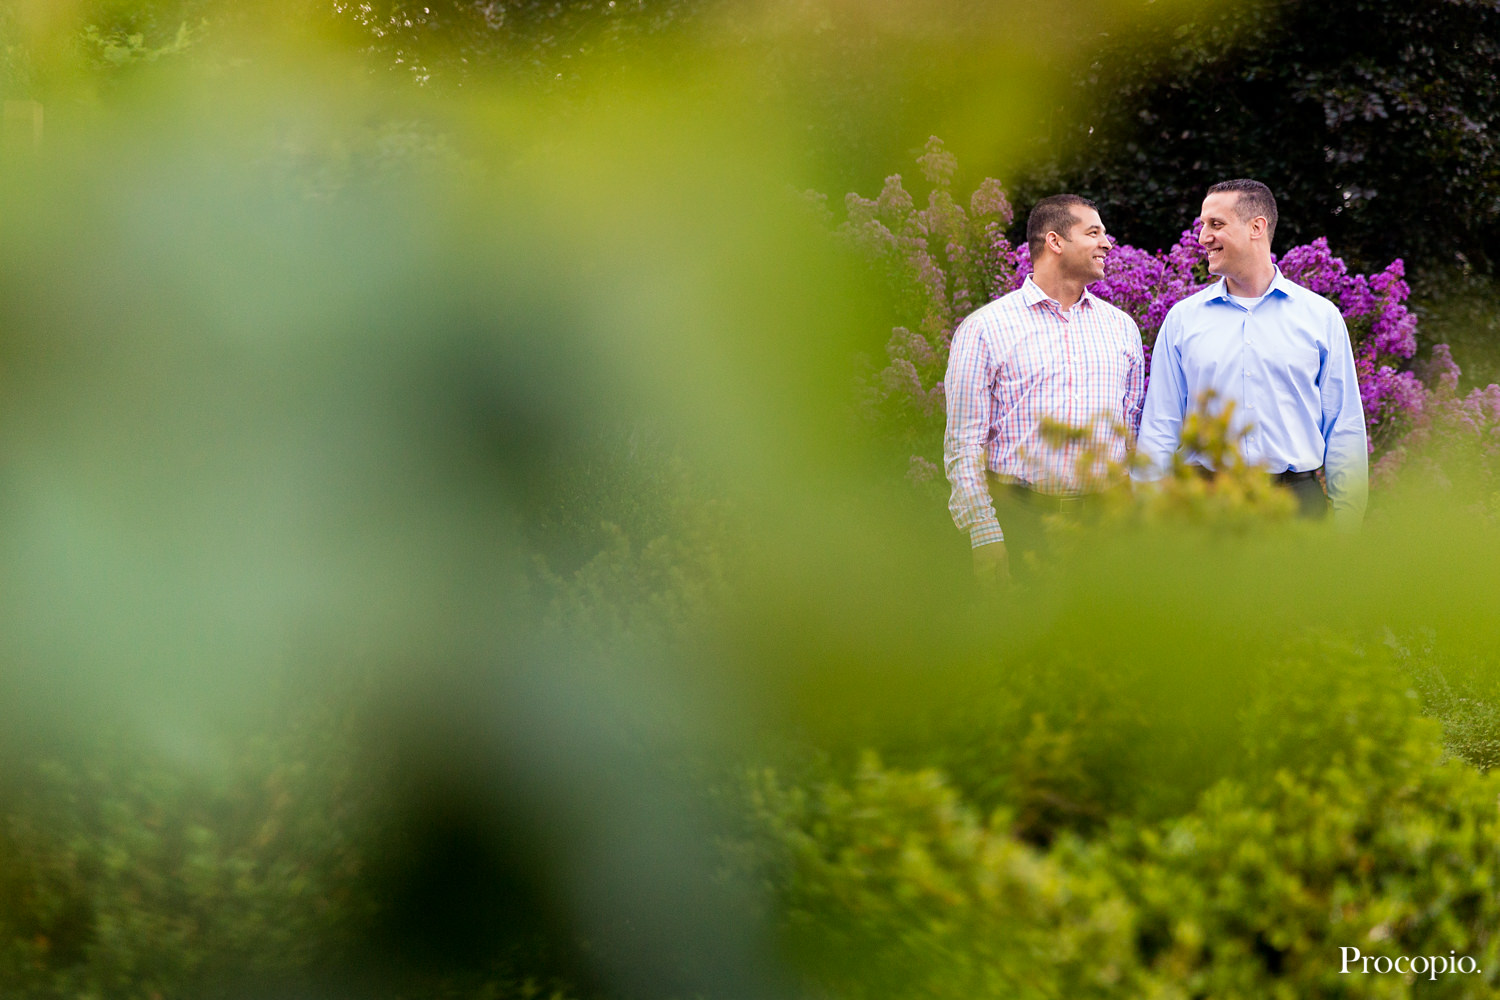 This engagement session was at The Bishop's Garden at the Washington Cathedral in Washington DC, The sun caught my lens in a very unique way as it shined through a rose petal, I was able to frame the gay couple within the pink rim of light, Groom and groom and cuddling in the garden, Procopio Photography, best top Washington DC photographer, best top Maryland photographer, best top Virginia photographer, best top DMV photographer, best top wedding photographer, best top commercial photographer, best top portrait photographer, best top boudoir photographer, modern fine art portraits, dramatic, unique, different, bold, editorial, photojournalism, award winning photographer, published photographer, memorable images, be different, stand out, engagement photography